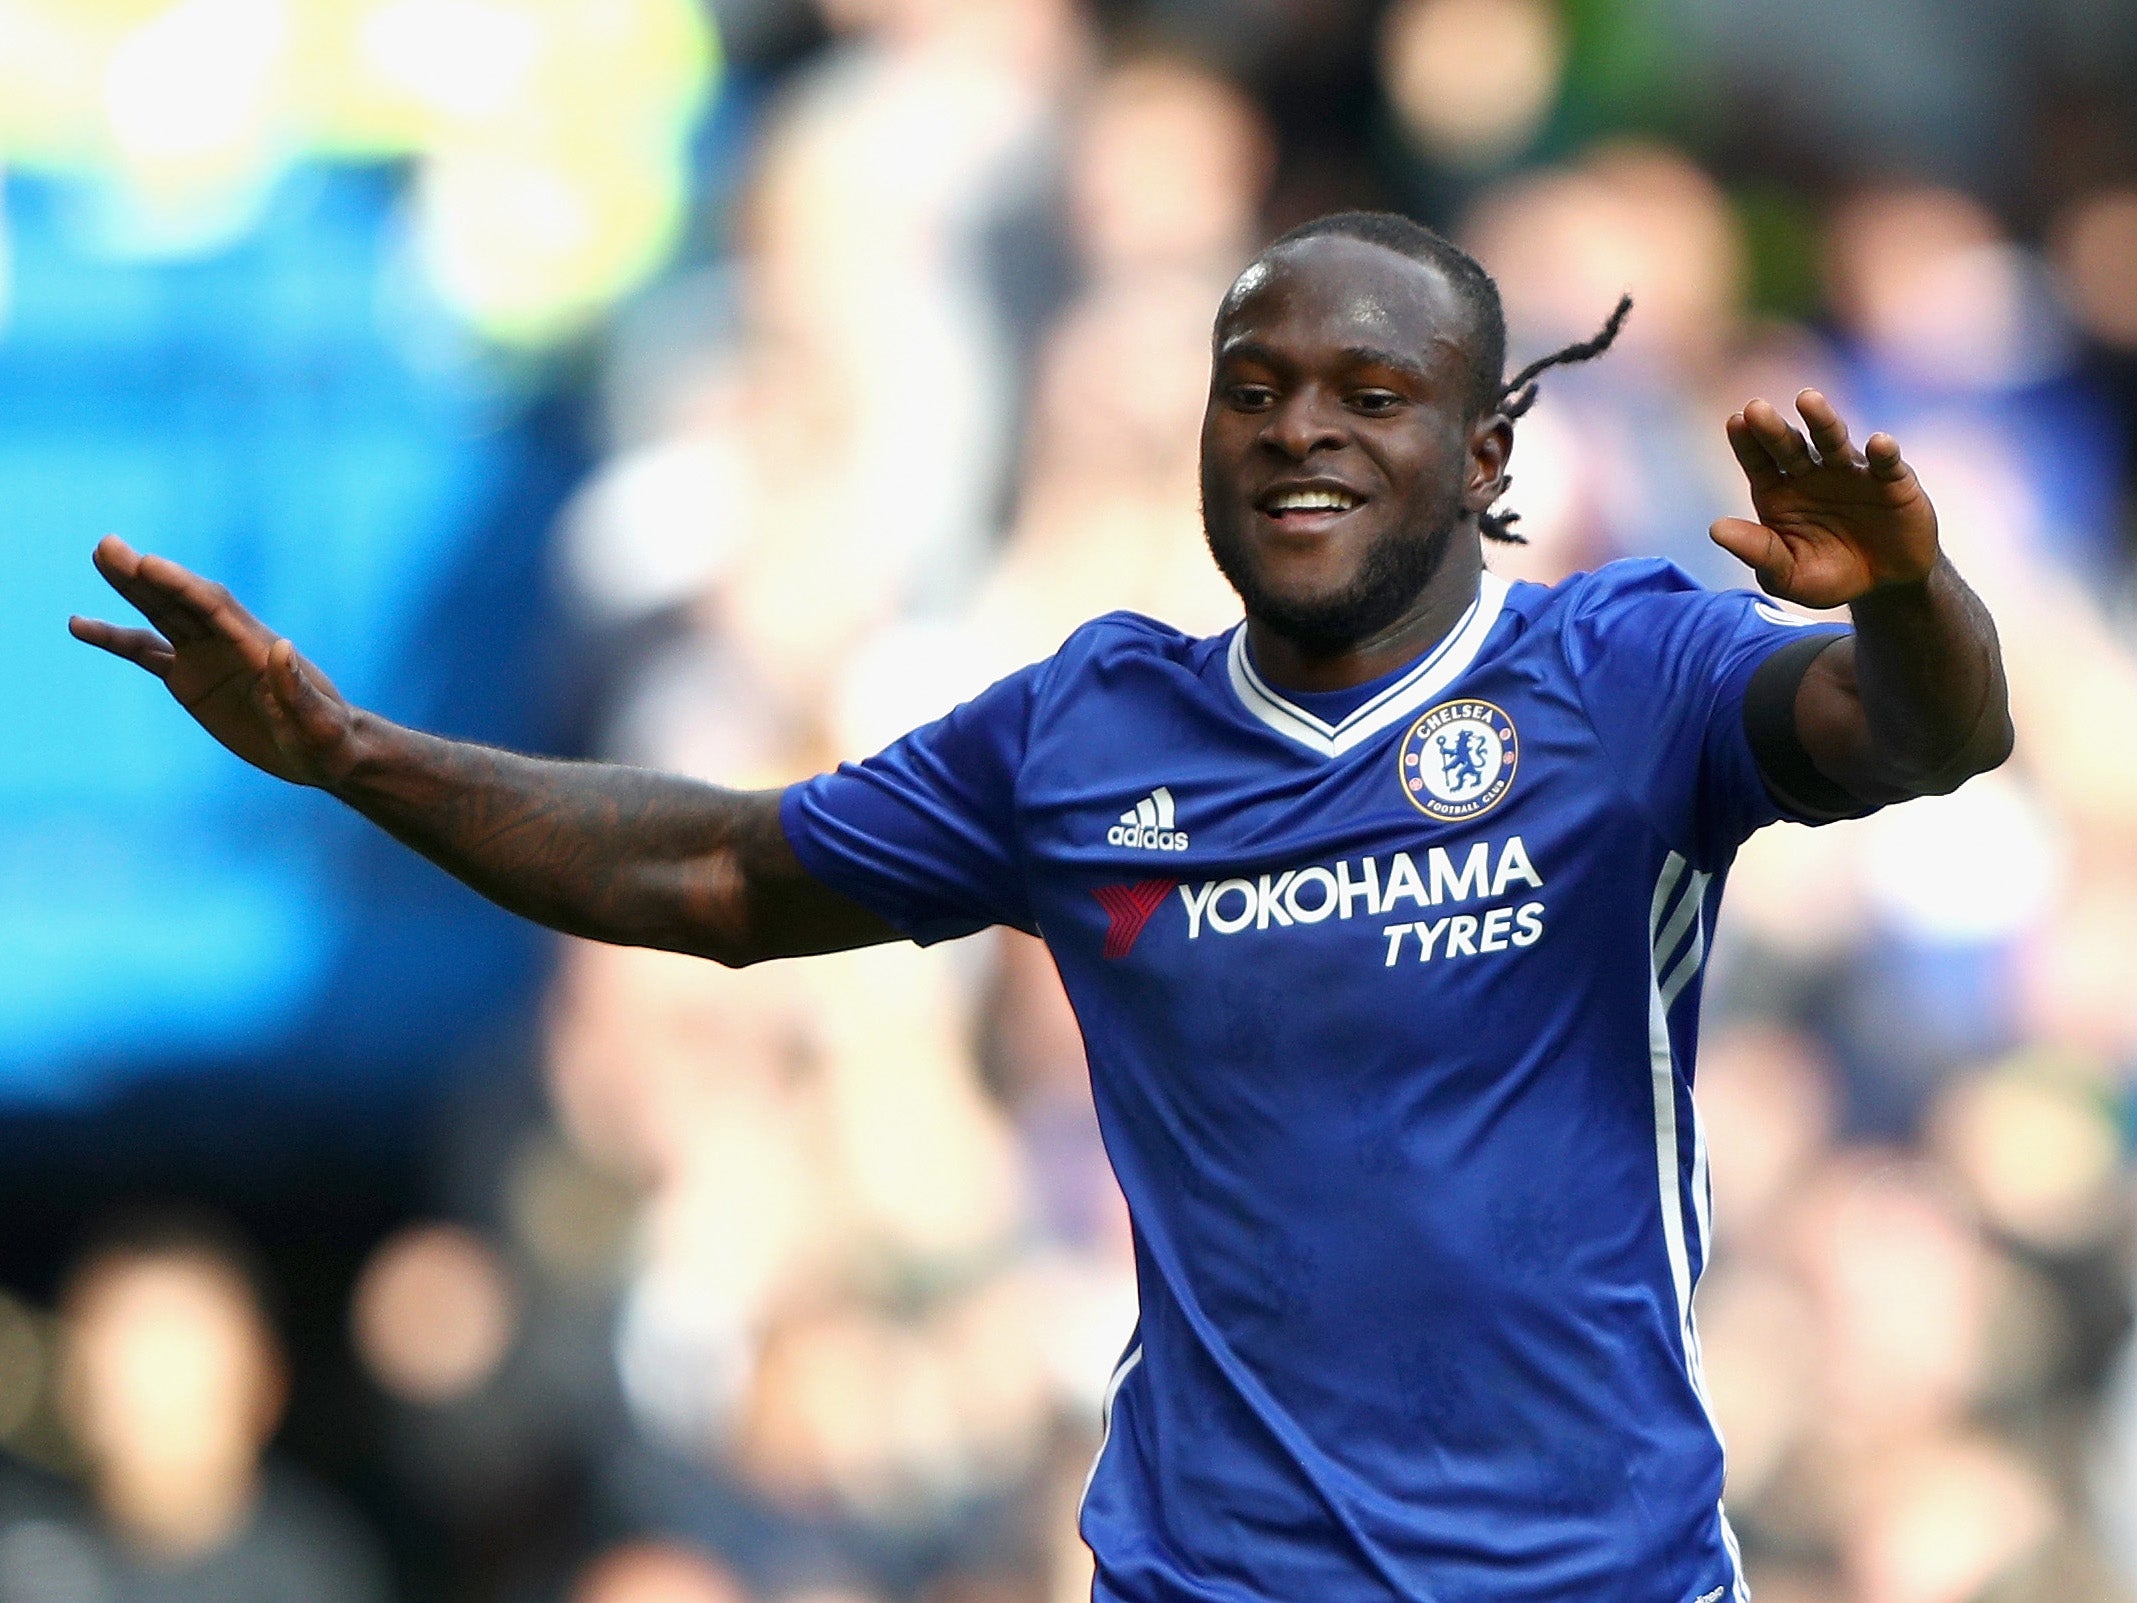 Victor Moses has become a key member of Antonio Conte's side